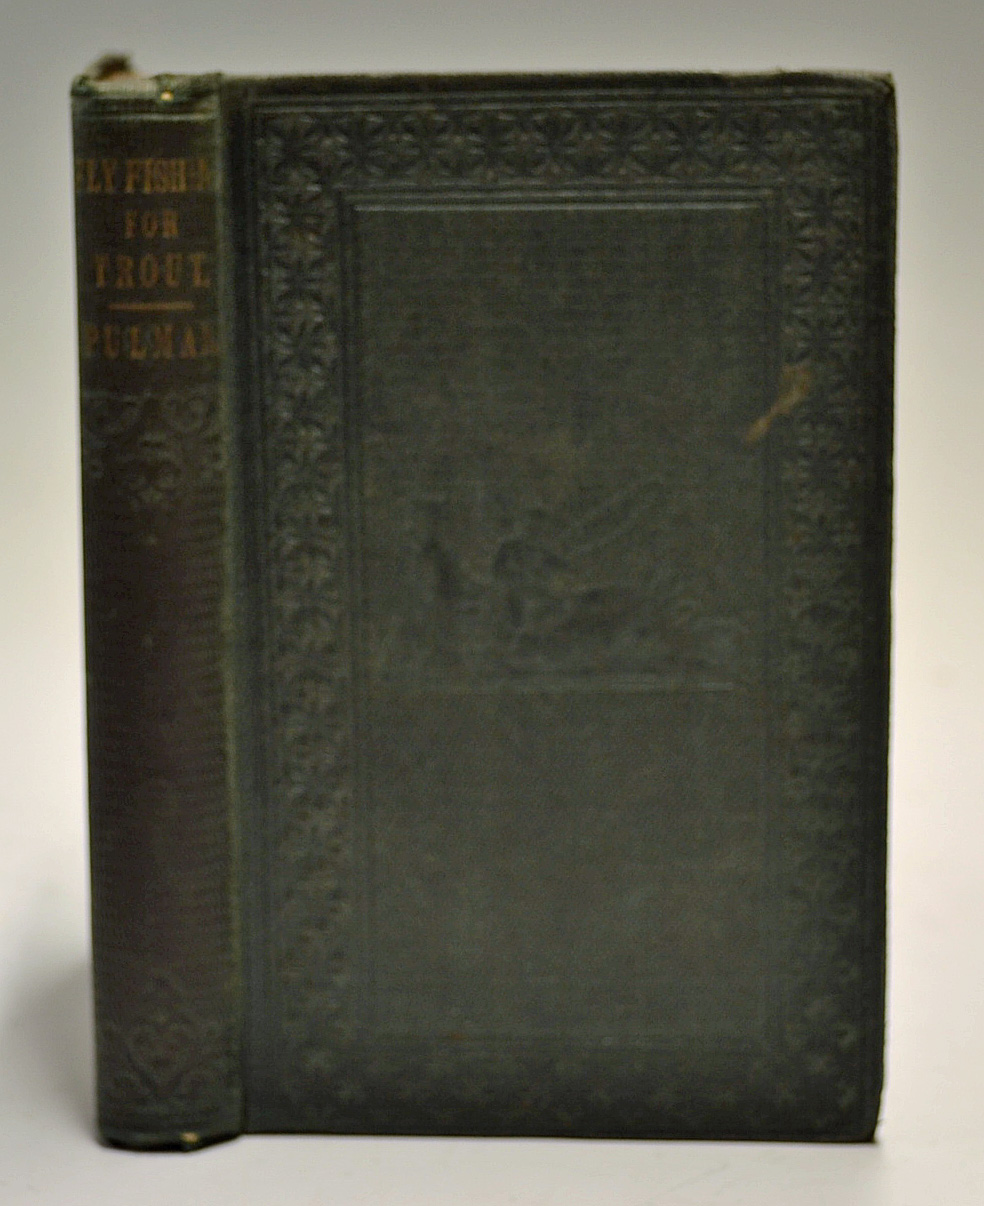 Pulman, G. P. R. - "The Vade-Mecum of Fly-Fishing For Trout", 1851, 3rd ed, London: Longman,